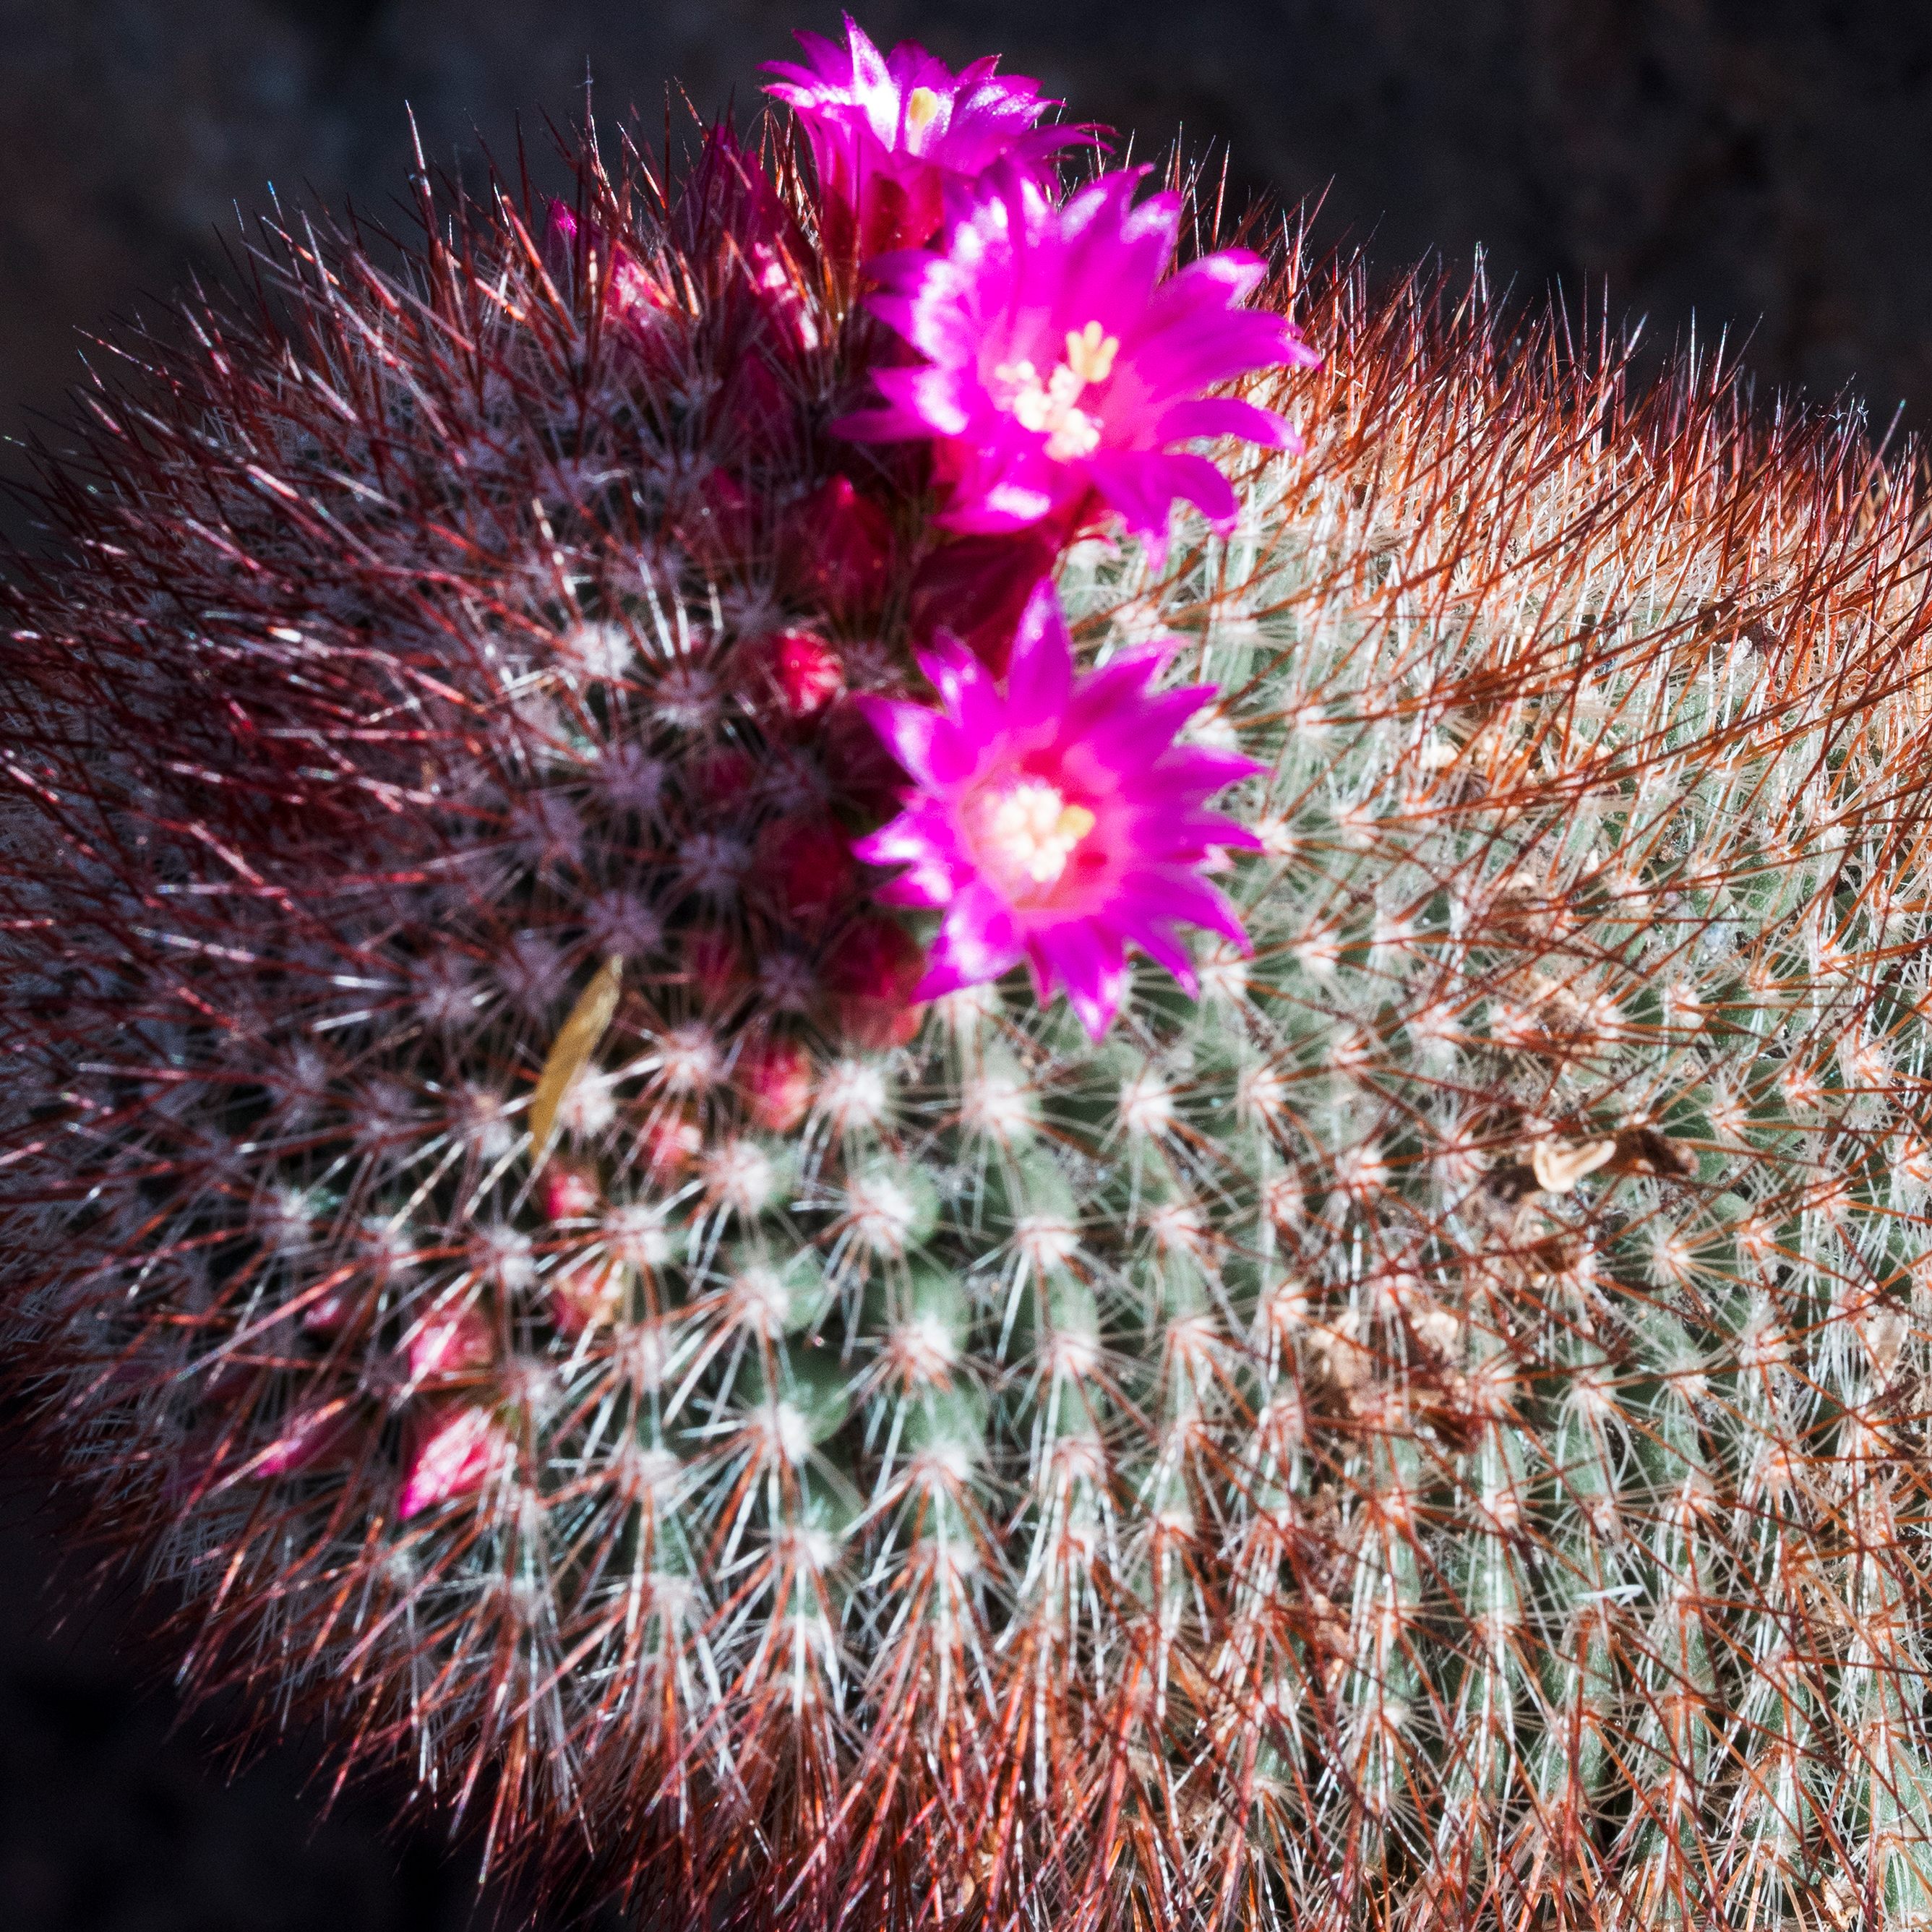 Cactus with Pink Flowers